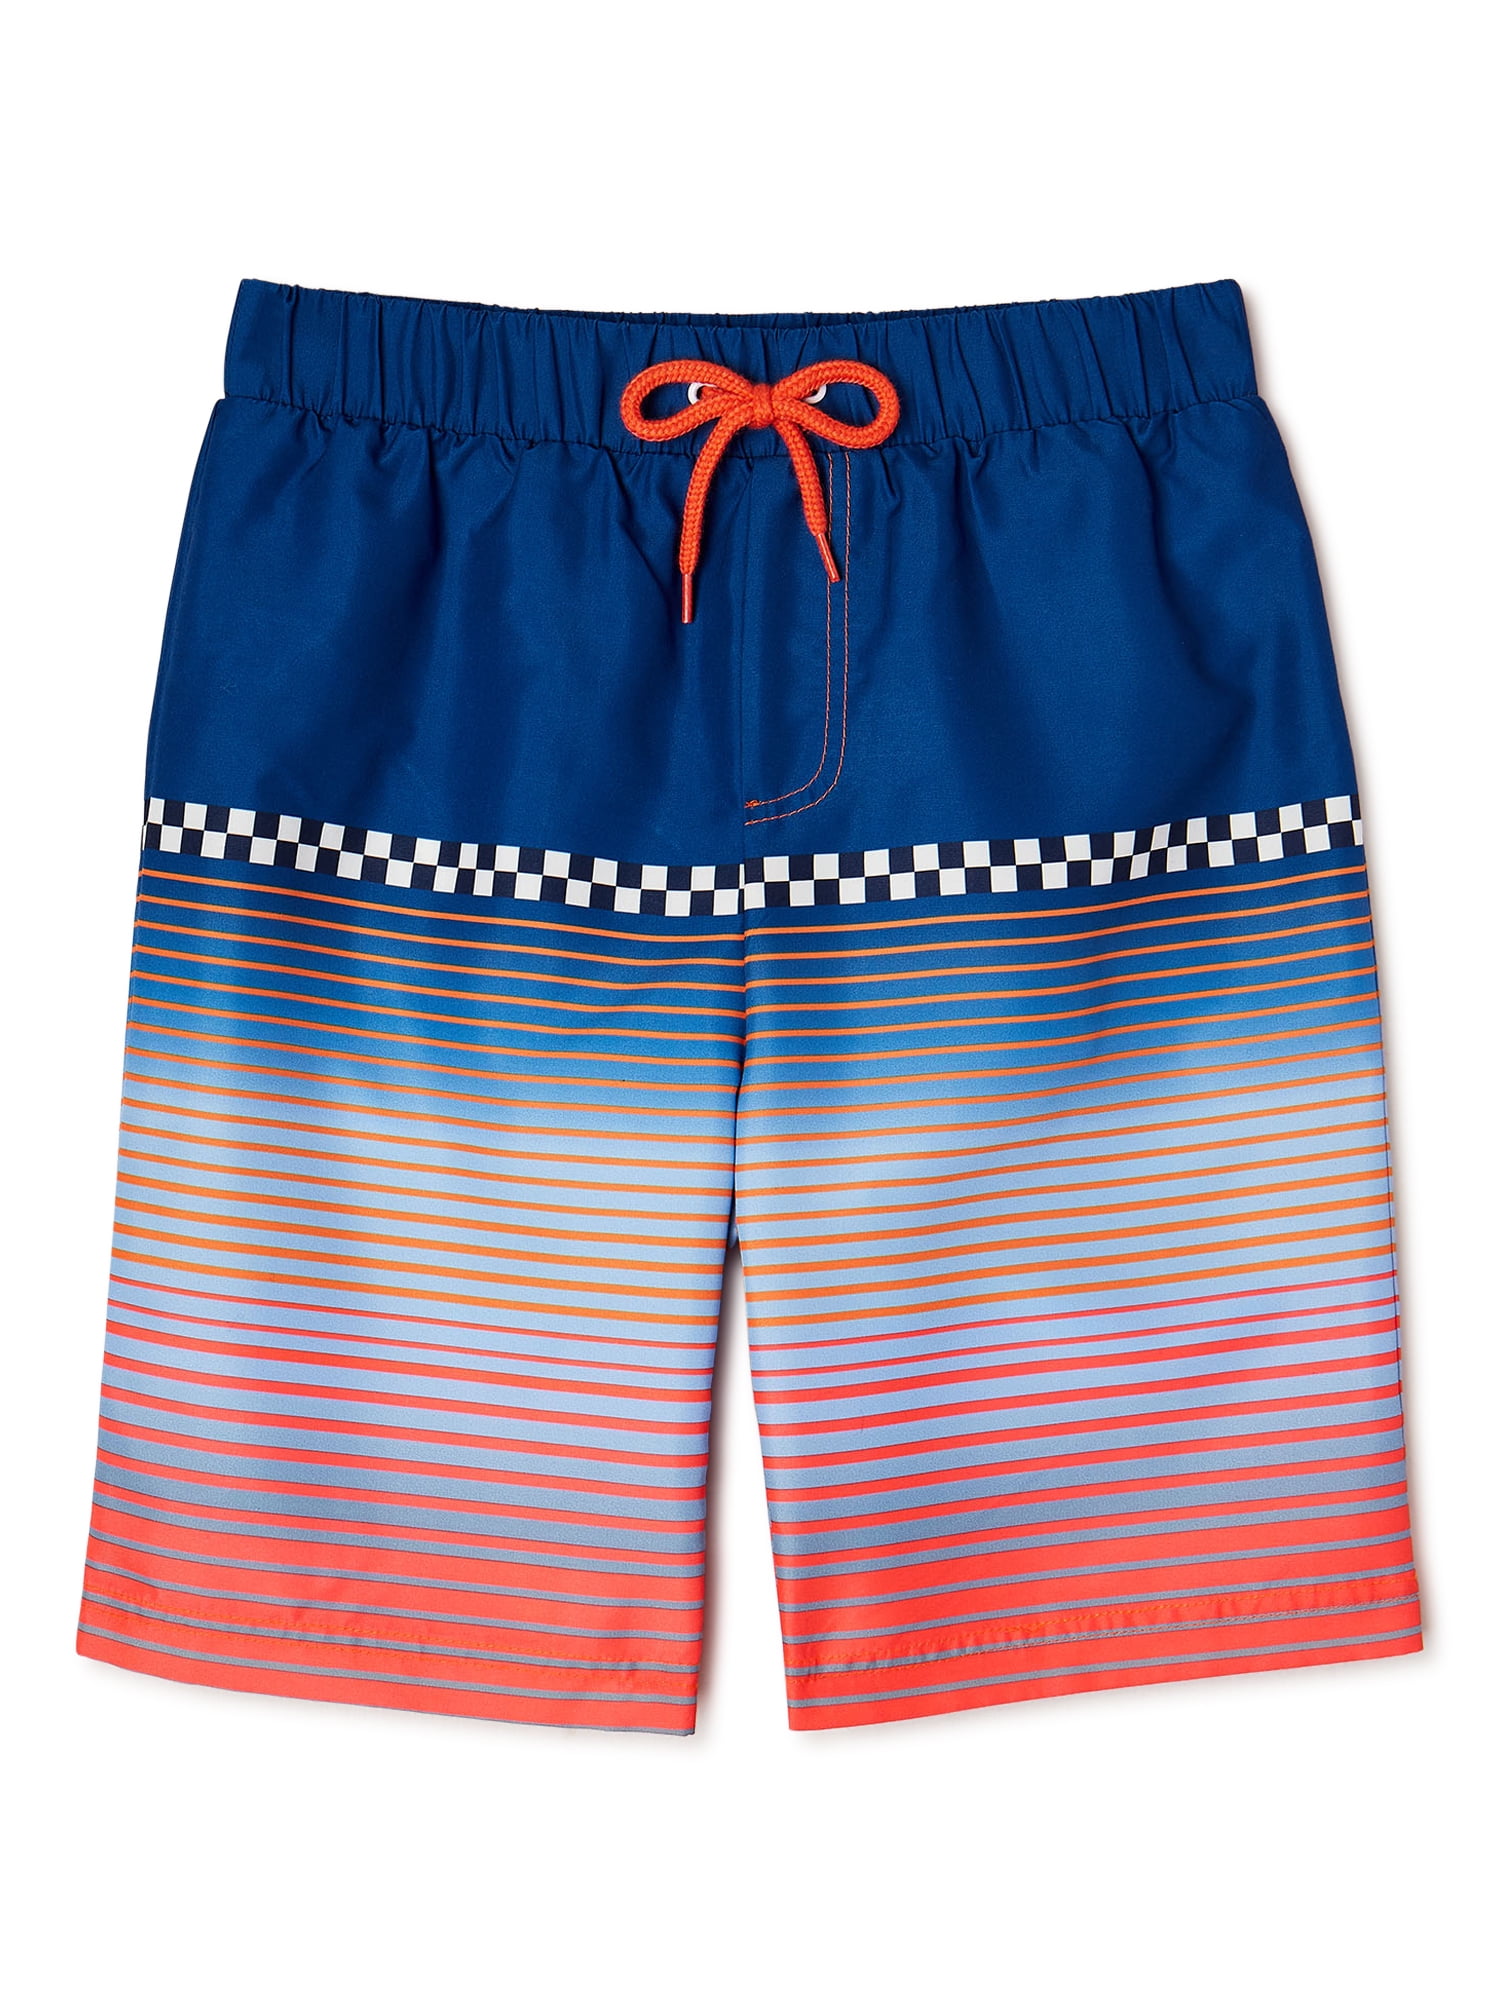 Details about   BALEAF Boys' Athletic Swim Jammer UPF 50 Quick Dry Youth Training Swimming Shor 